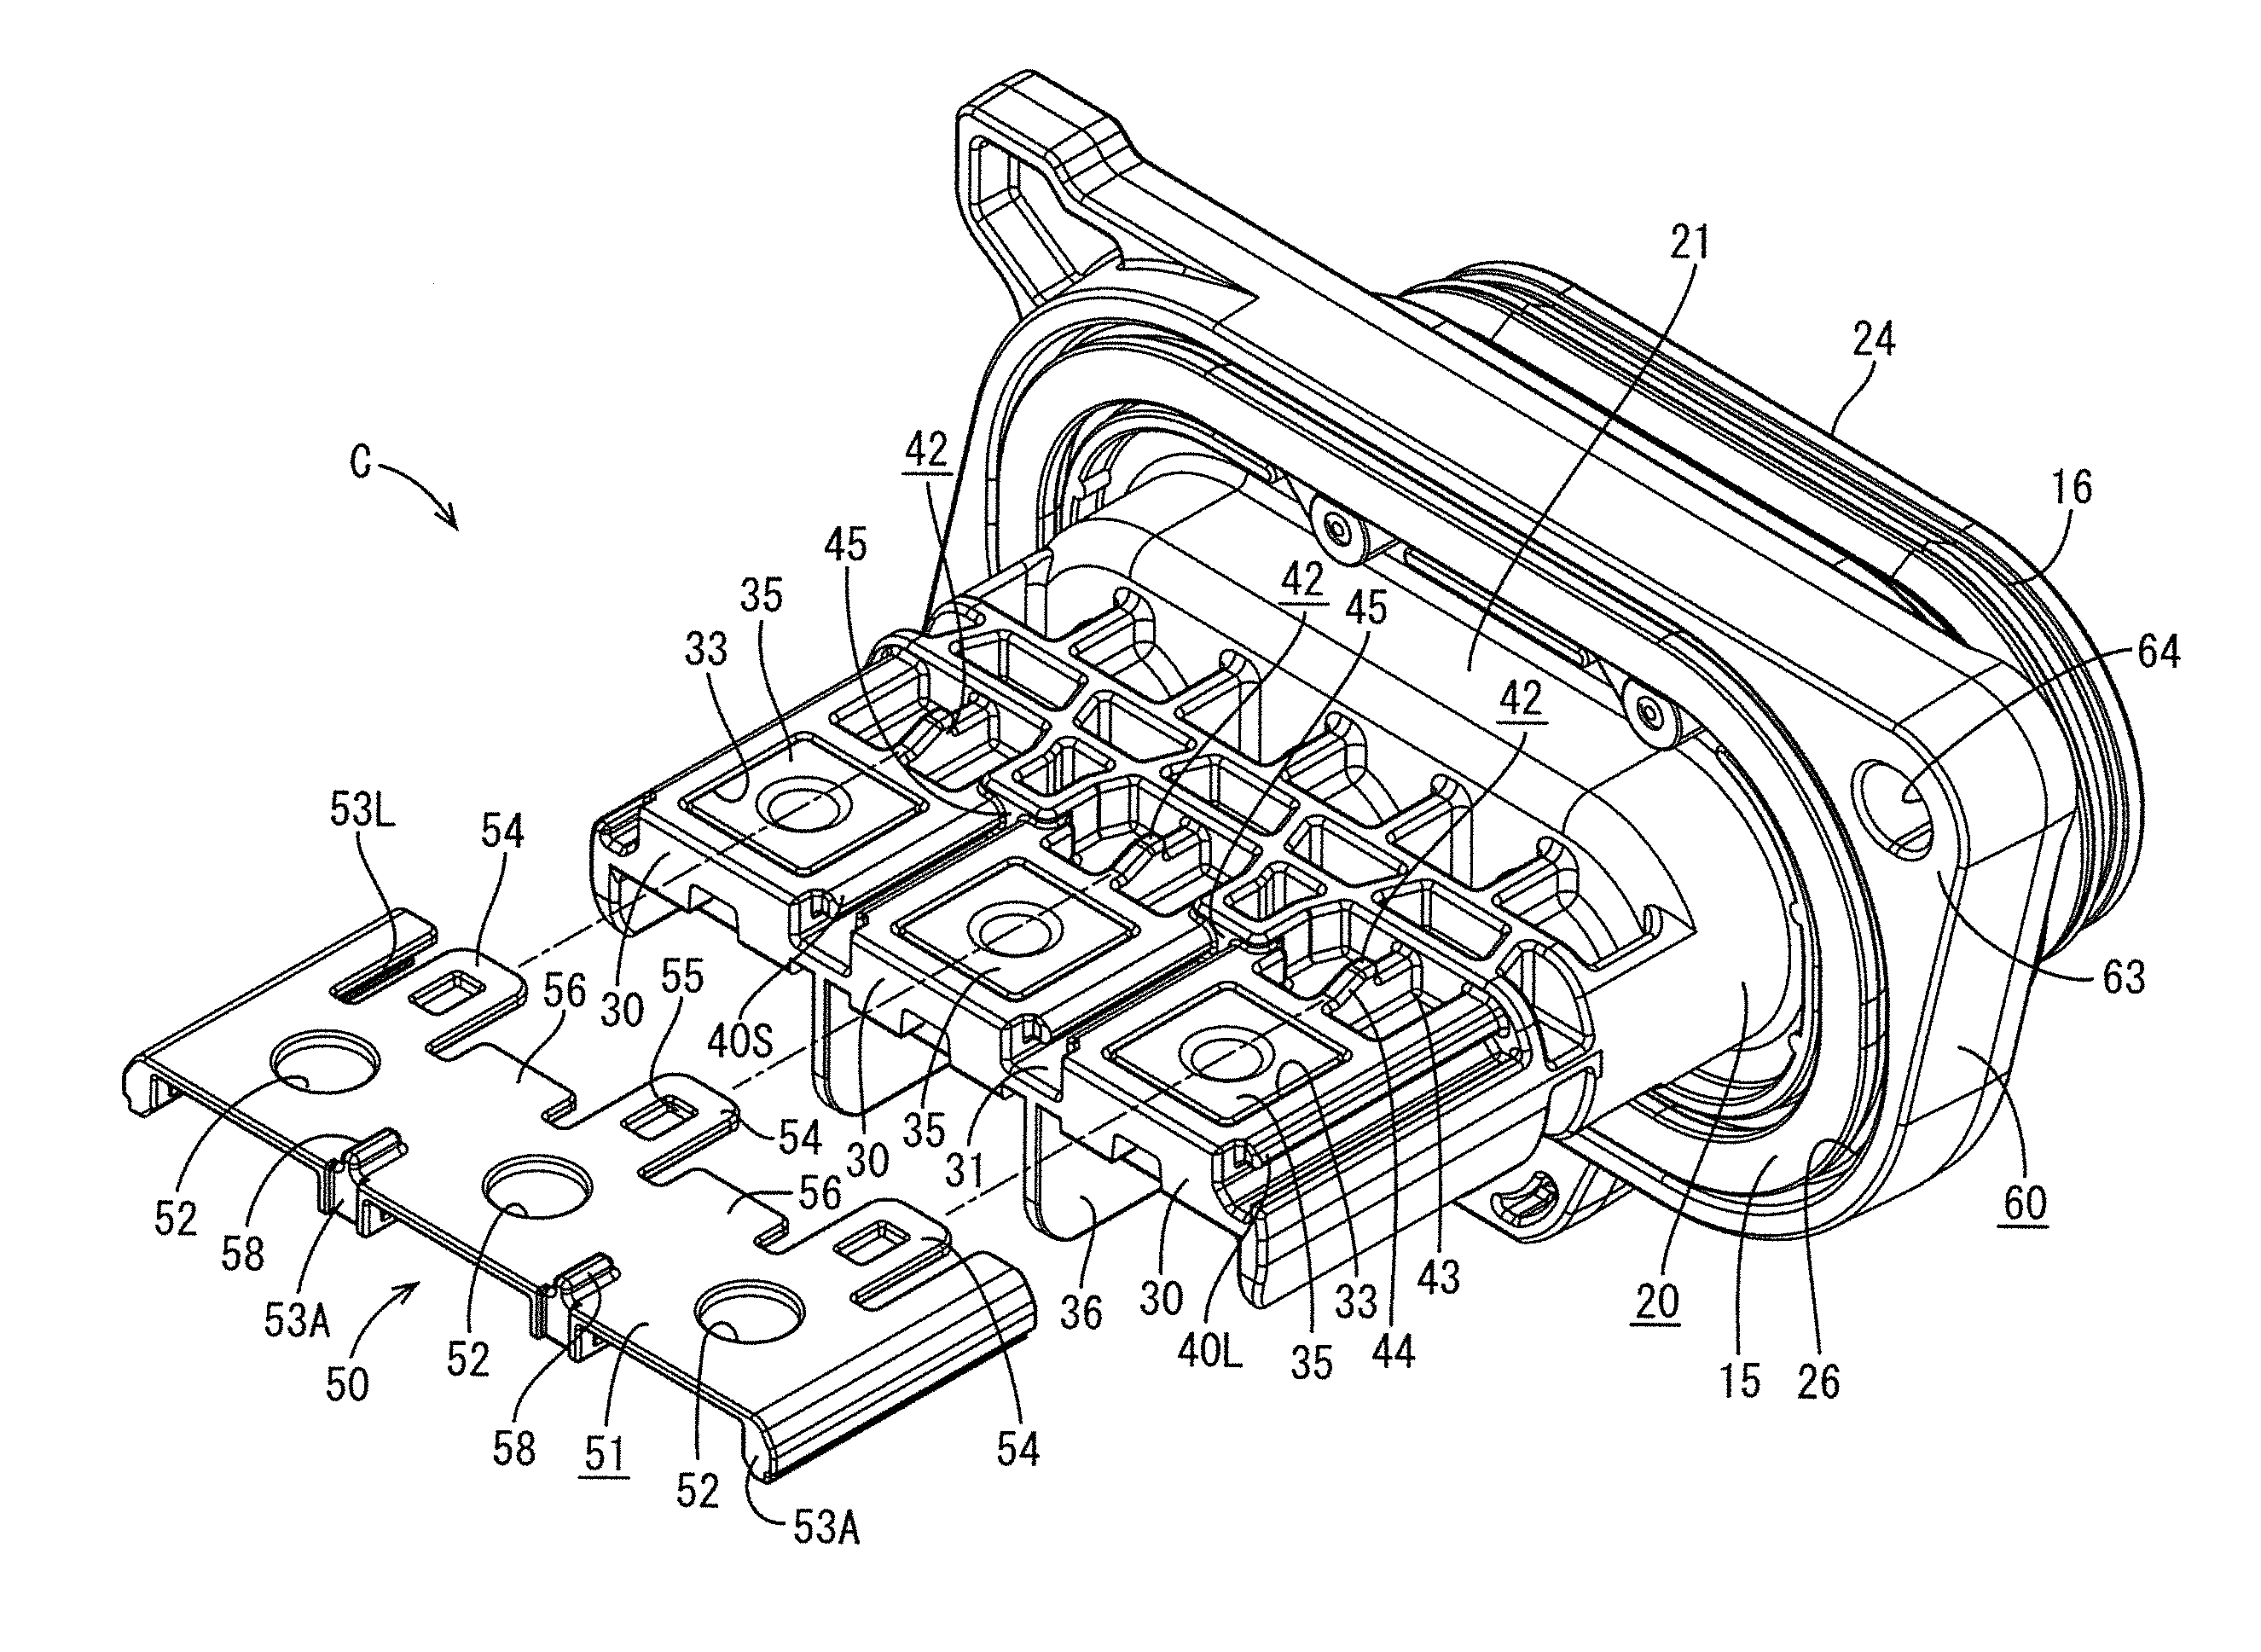 Device connector